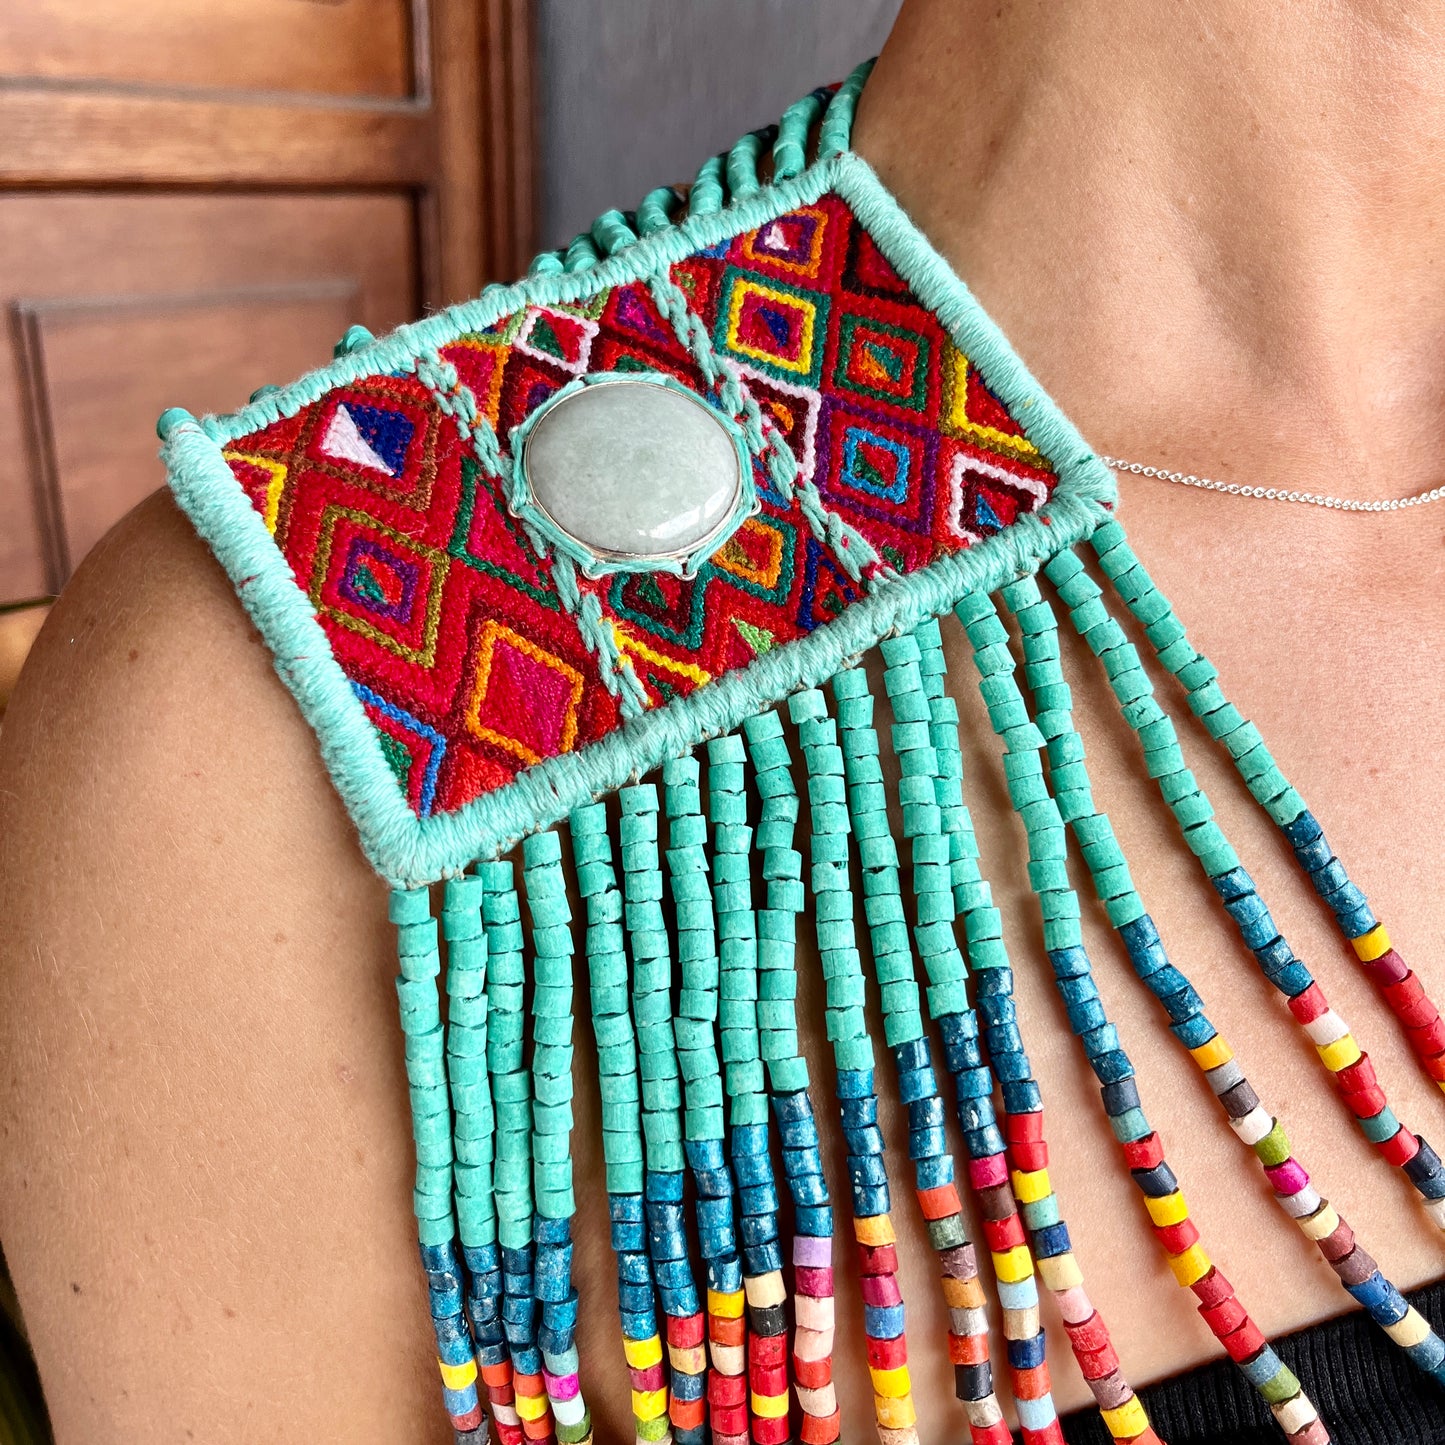 Body Jewelry with Beaded Chains - Warrior, navy blue/multicolor – Los  Colores de la Tierra - Handmade Jewelry as colorful as you 🌈